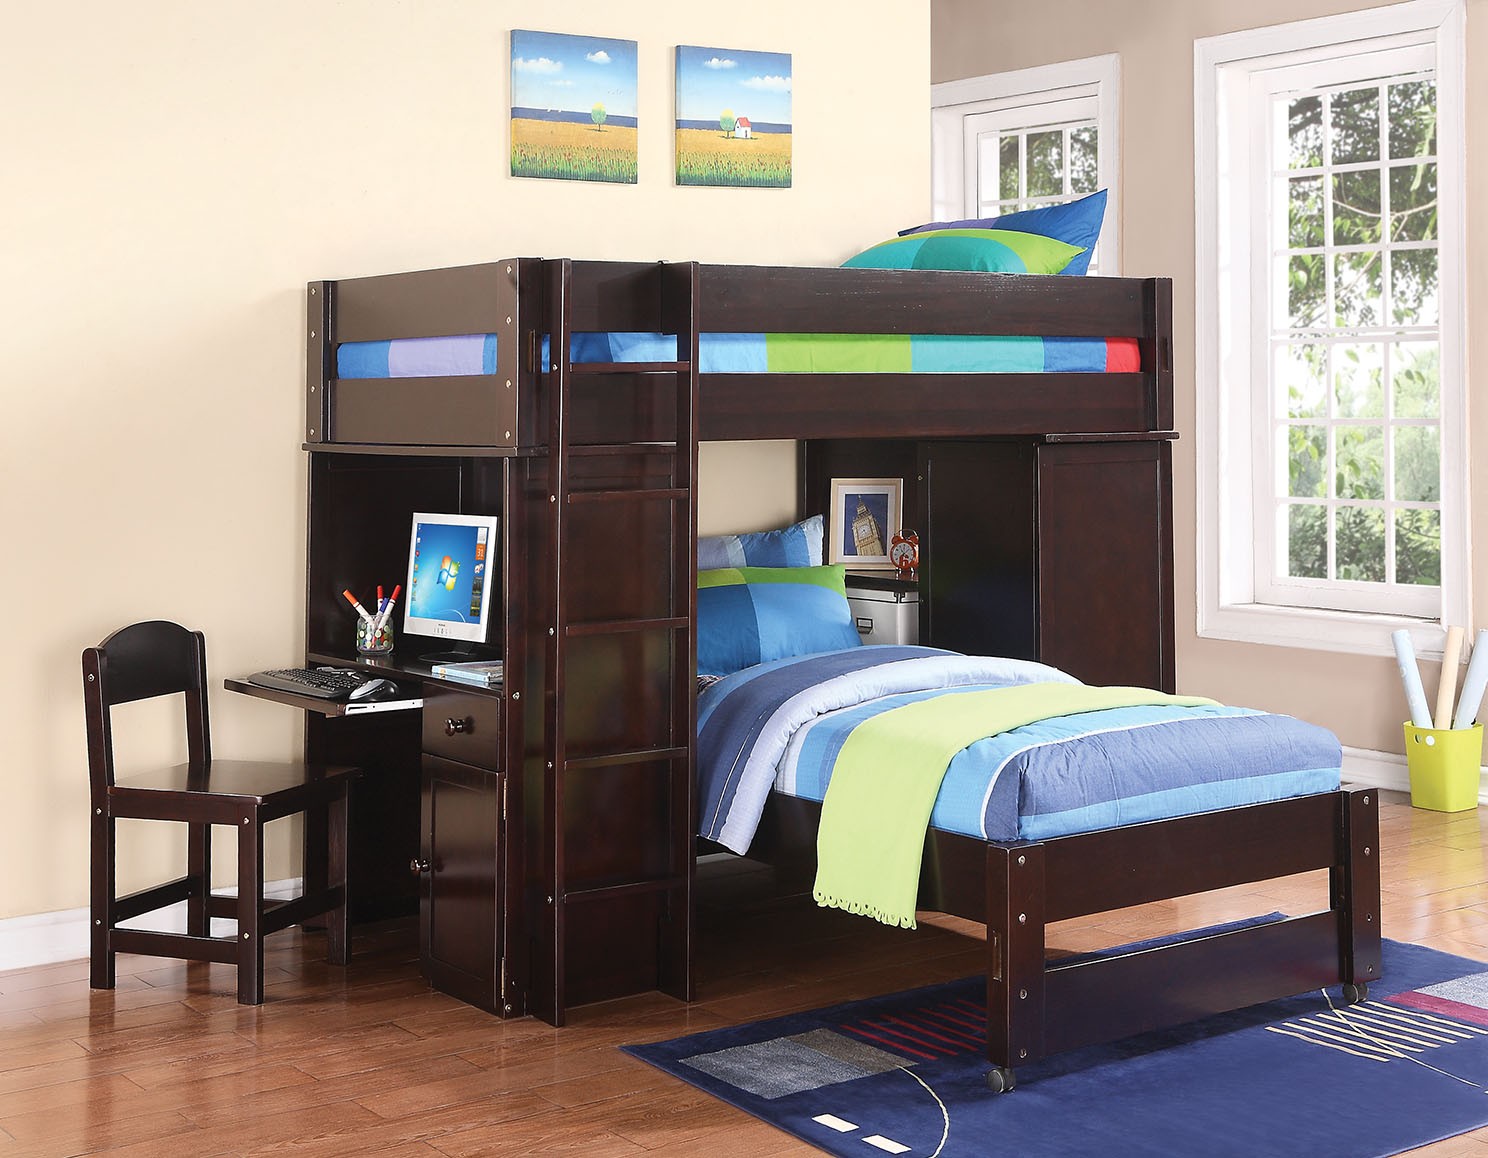 bunk beds with a desk at the bottom